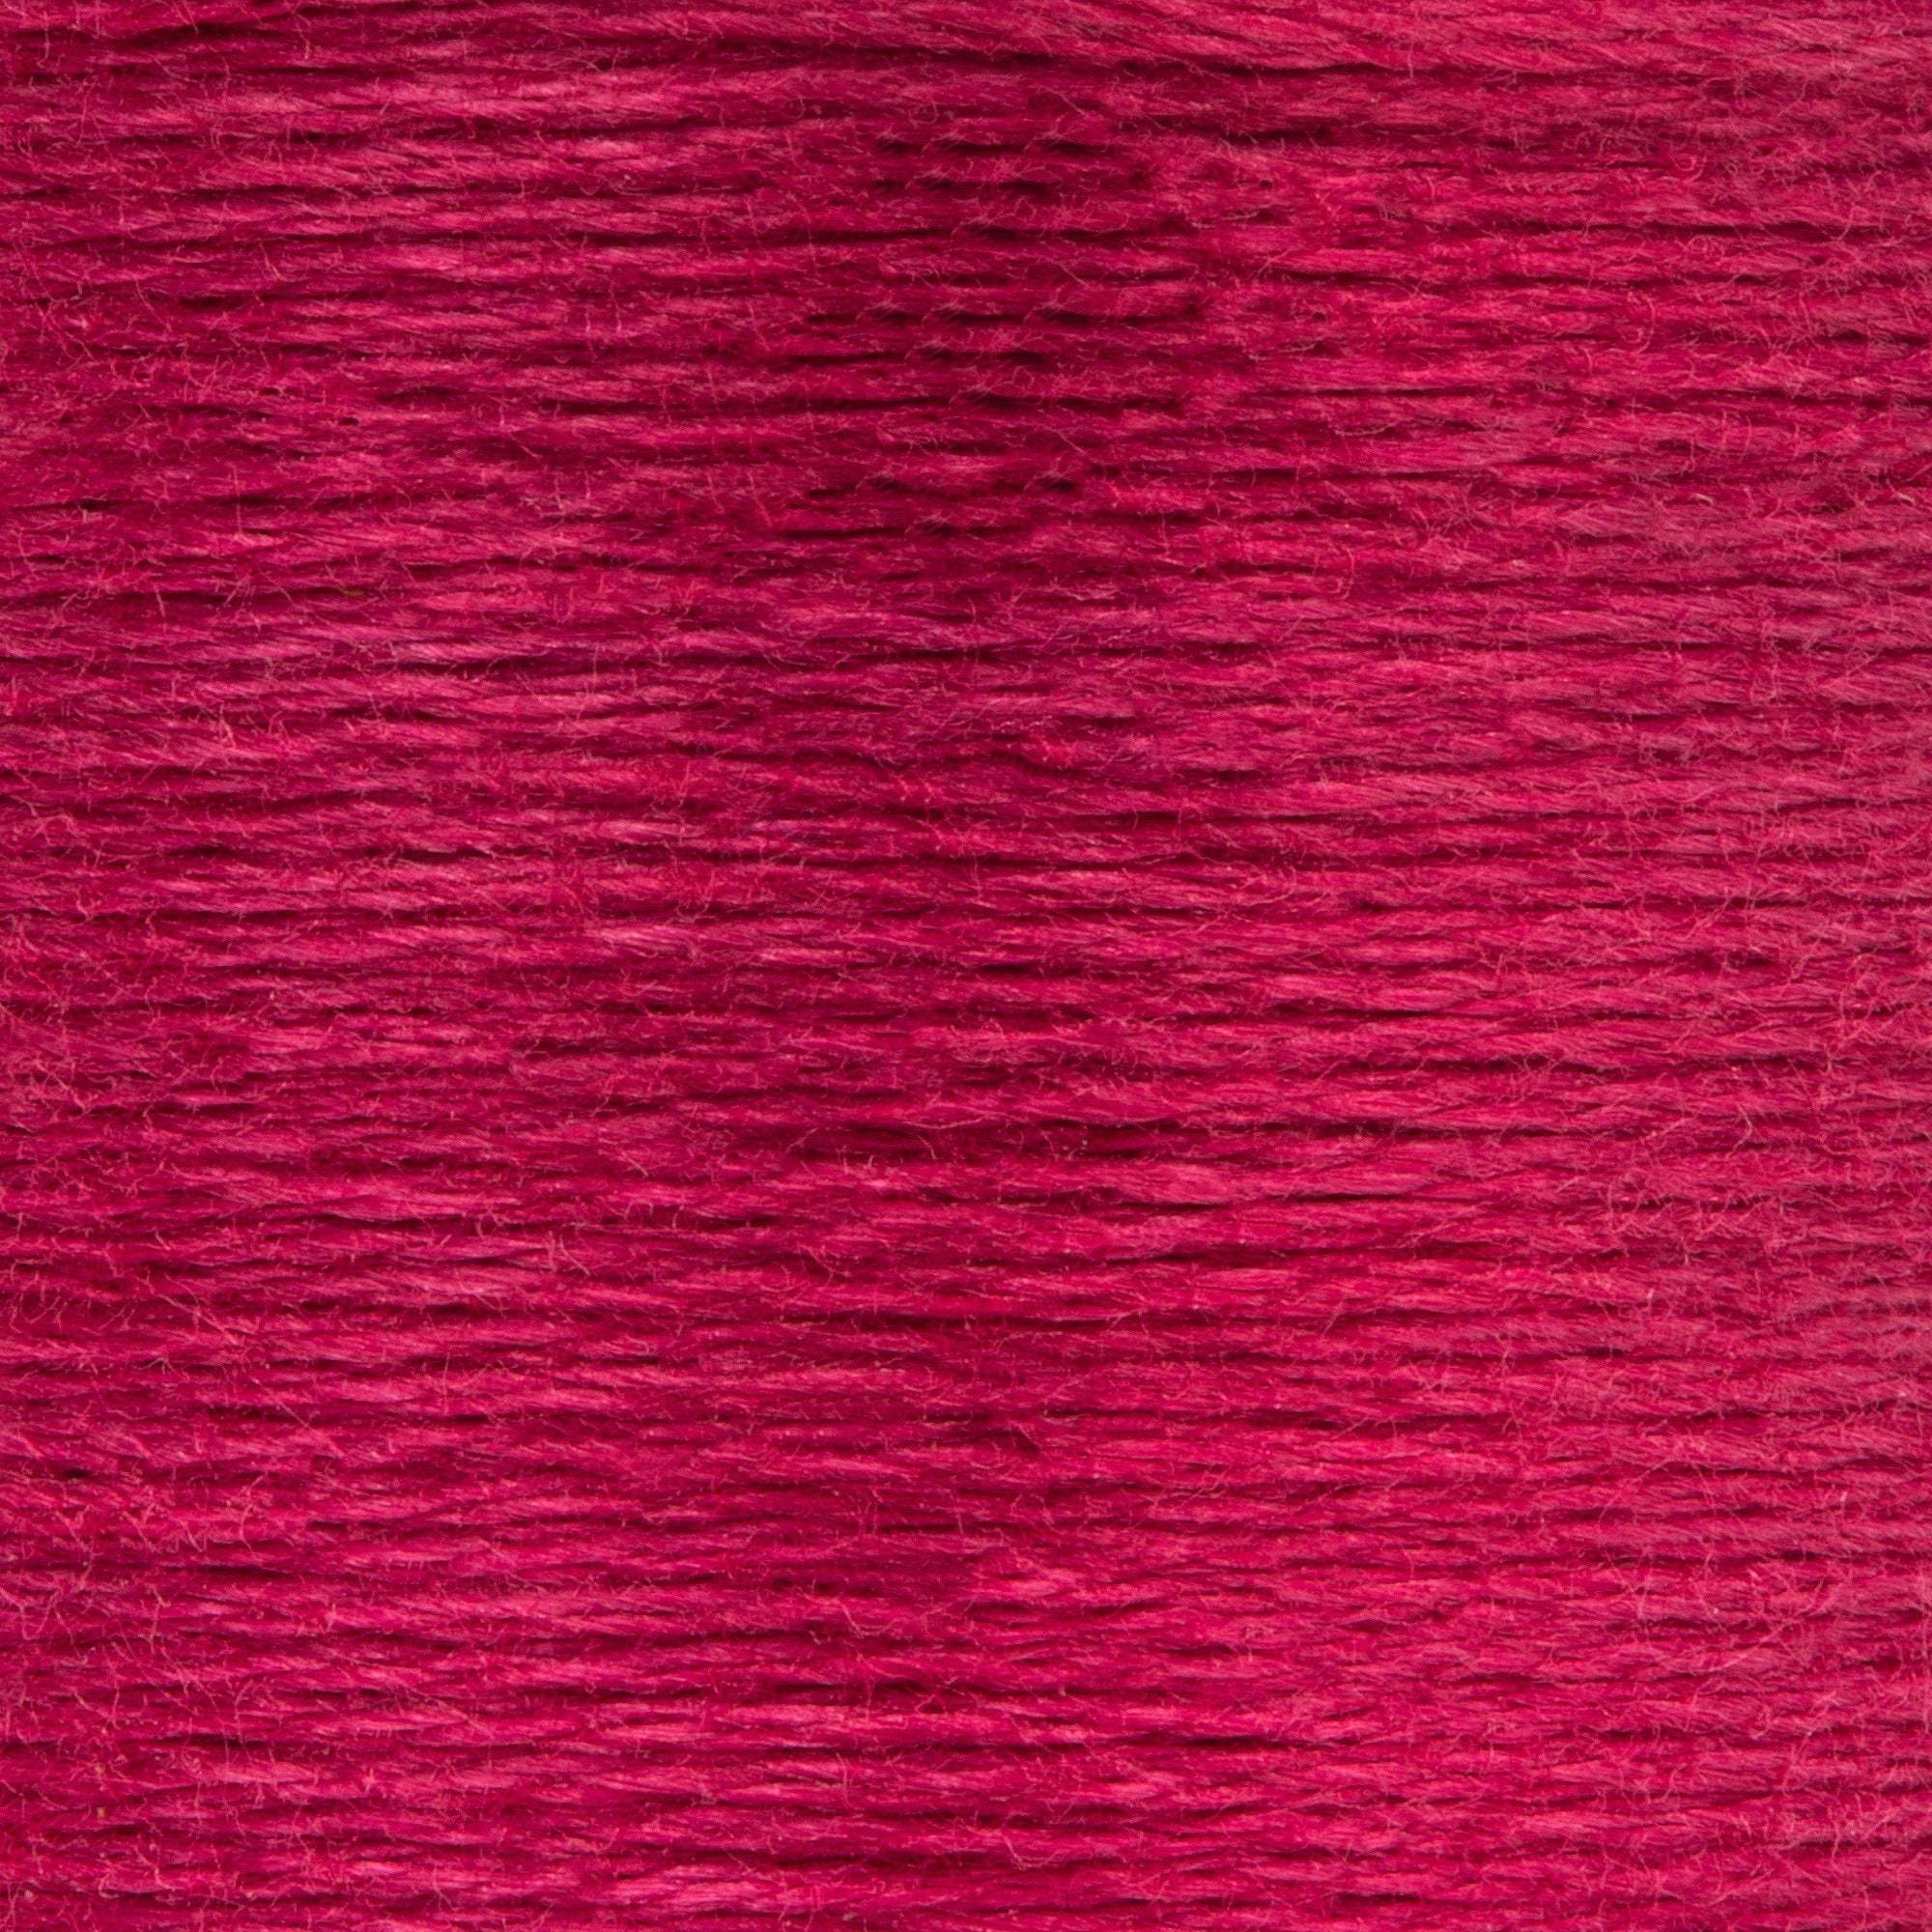 Anchor Embroidery Floss in Raspberry Med